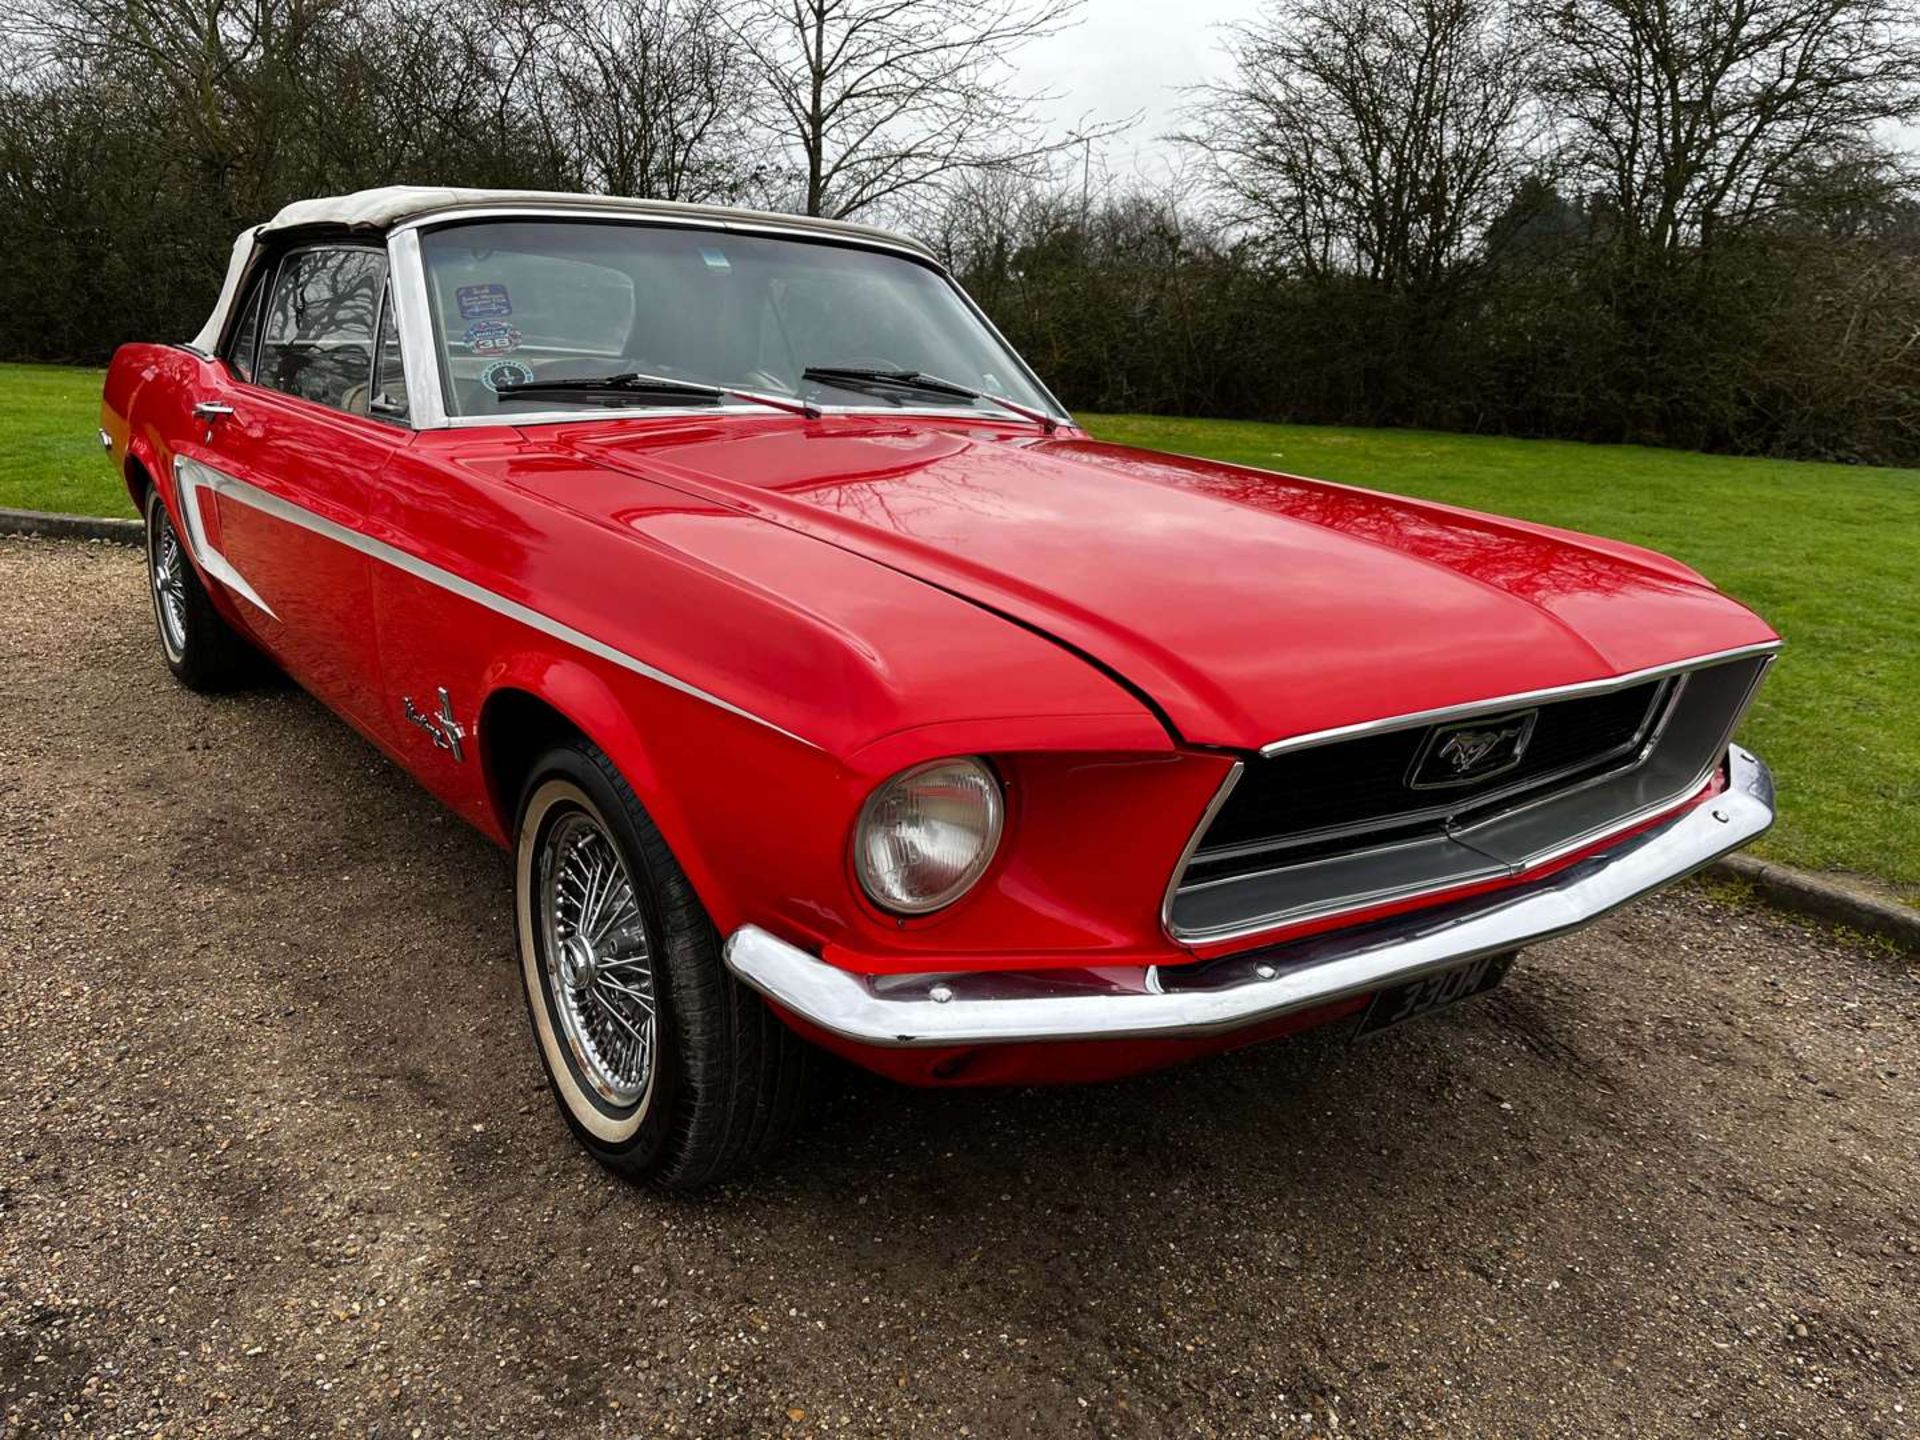 1968 FORD MUSTANG 4.7 V8 AUTO CONVERTIBLE LHD - Image 2 of 30